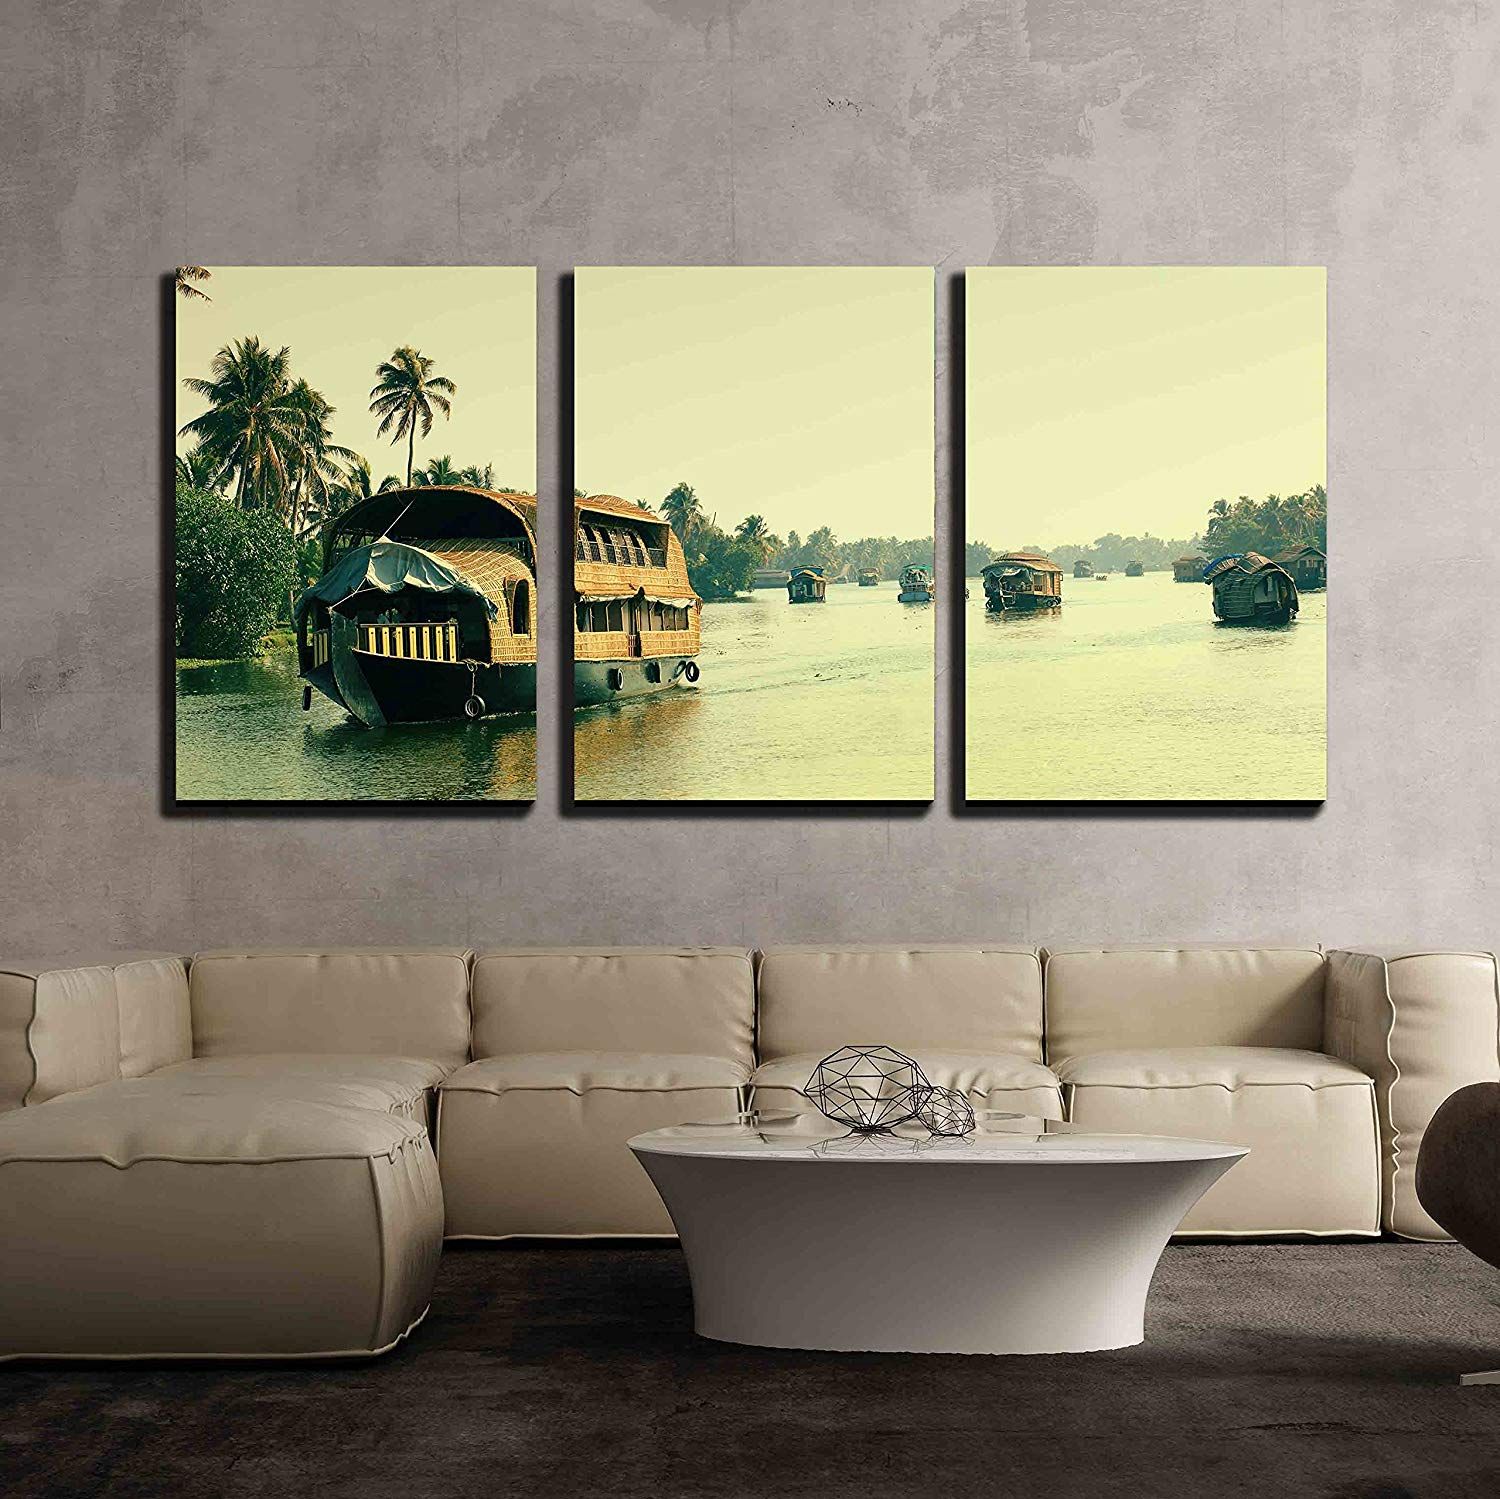 Wall26 3 Piece Canvas Wall Art – Picturesque Tropical Landscape With  Traditional Houseboat (View 9 of 20)